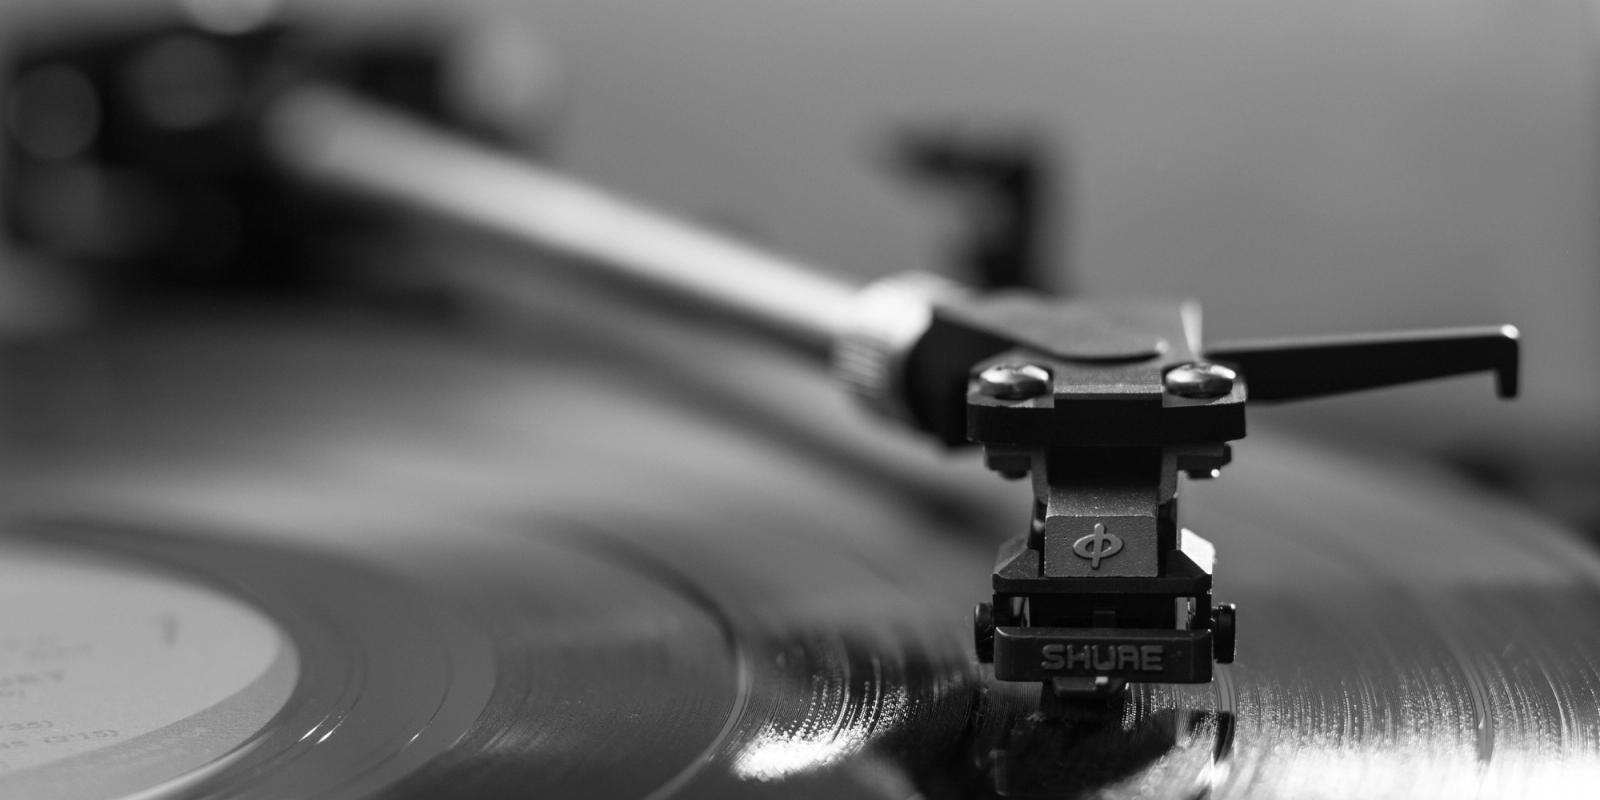 Record player needle playing a vinyl record